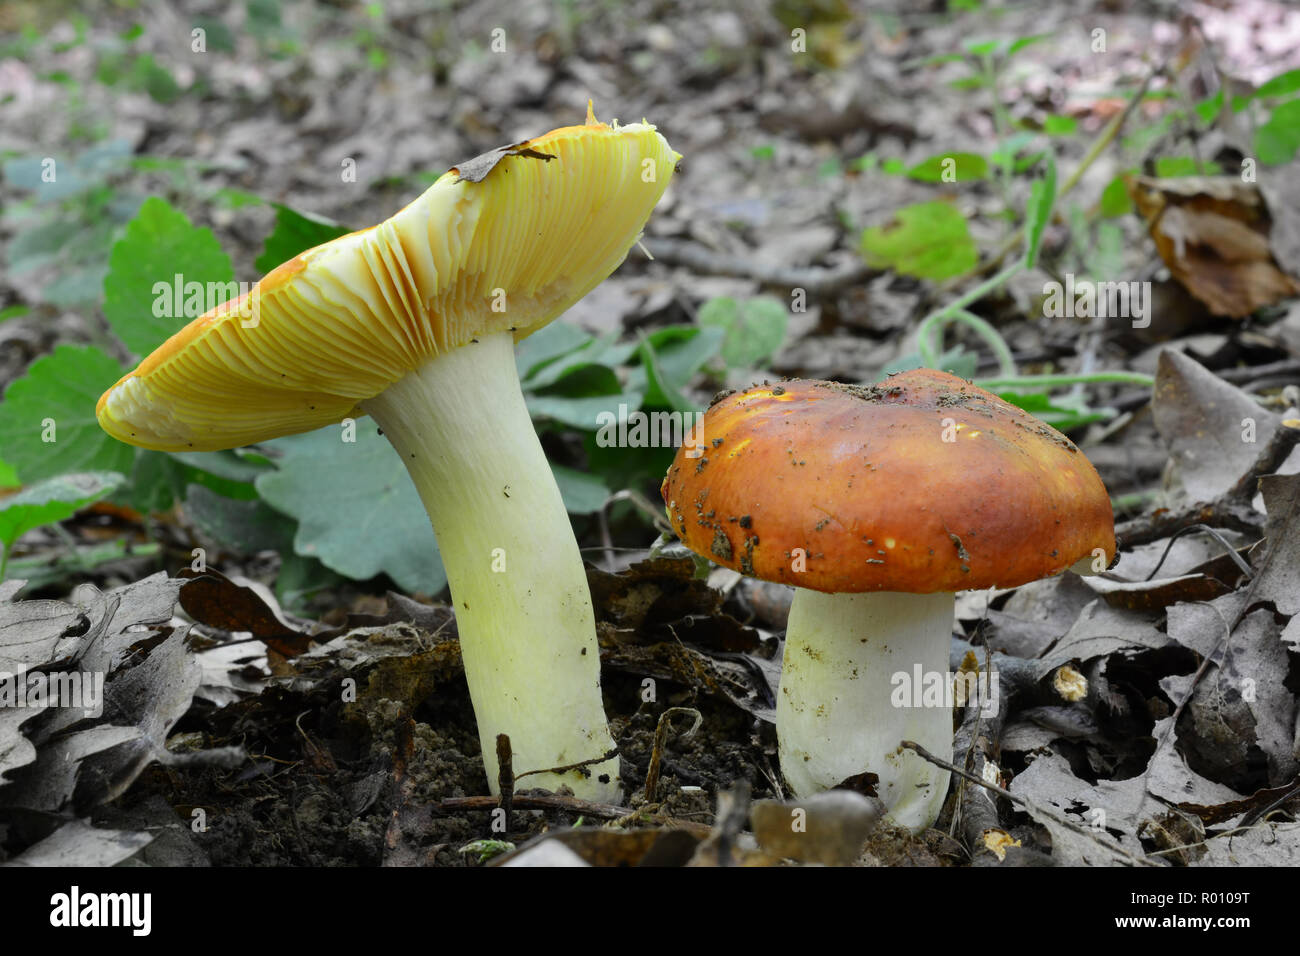 Two beautiful  specimen of Russula aurea, commonly known as the Gilded brittlegill,  an uncommon species of mushroom found in deciduous woodland in Eu Stock Photo